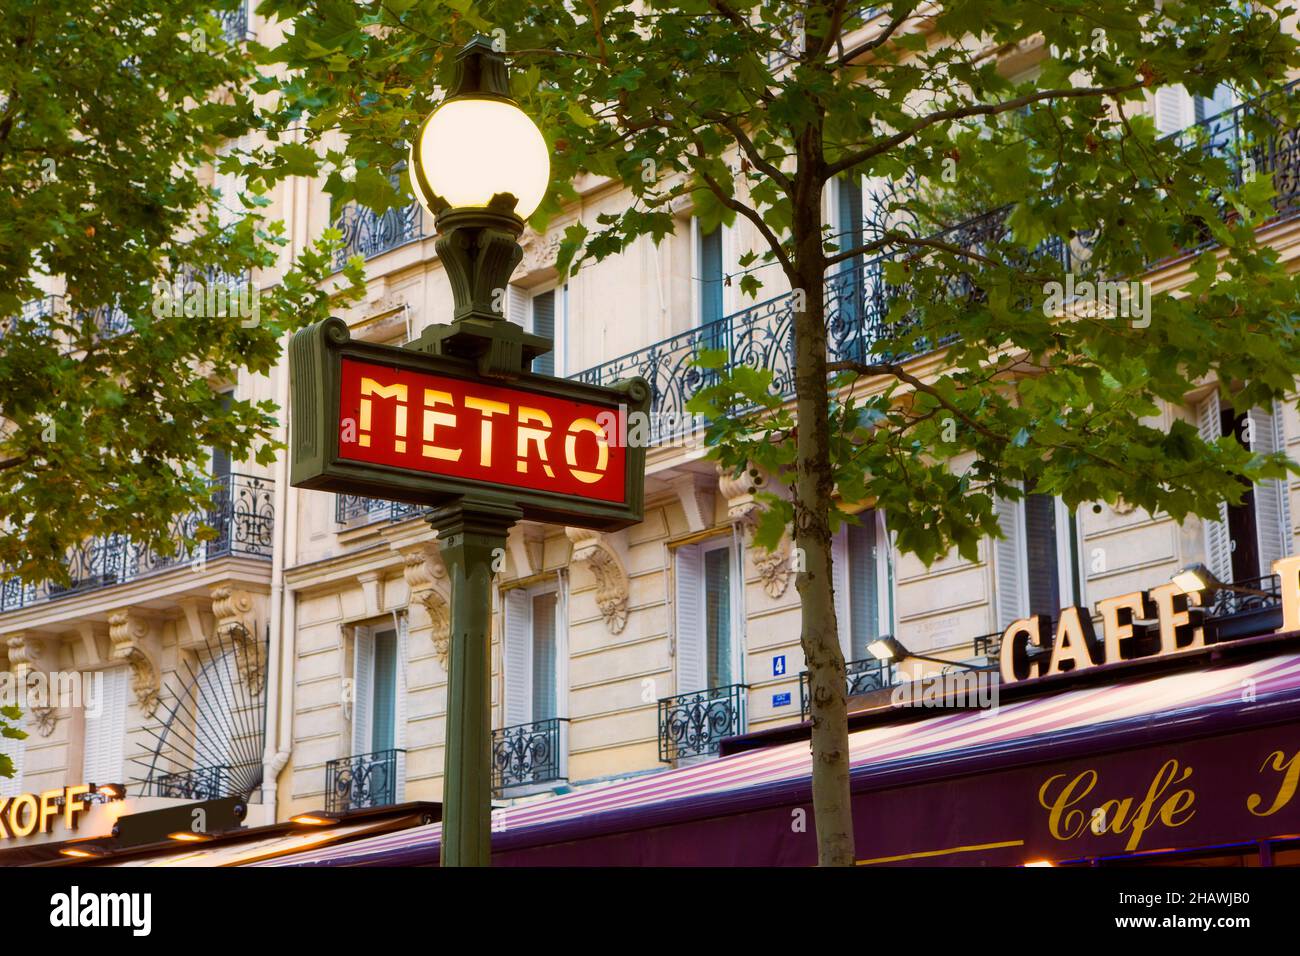 Metro Sign outside a Cafe, Paris, France Stock Photo